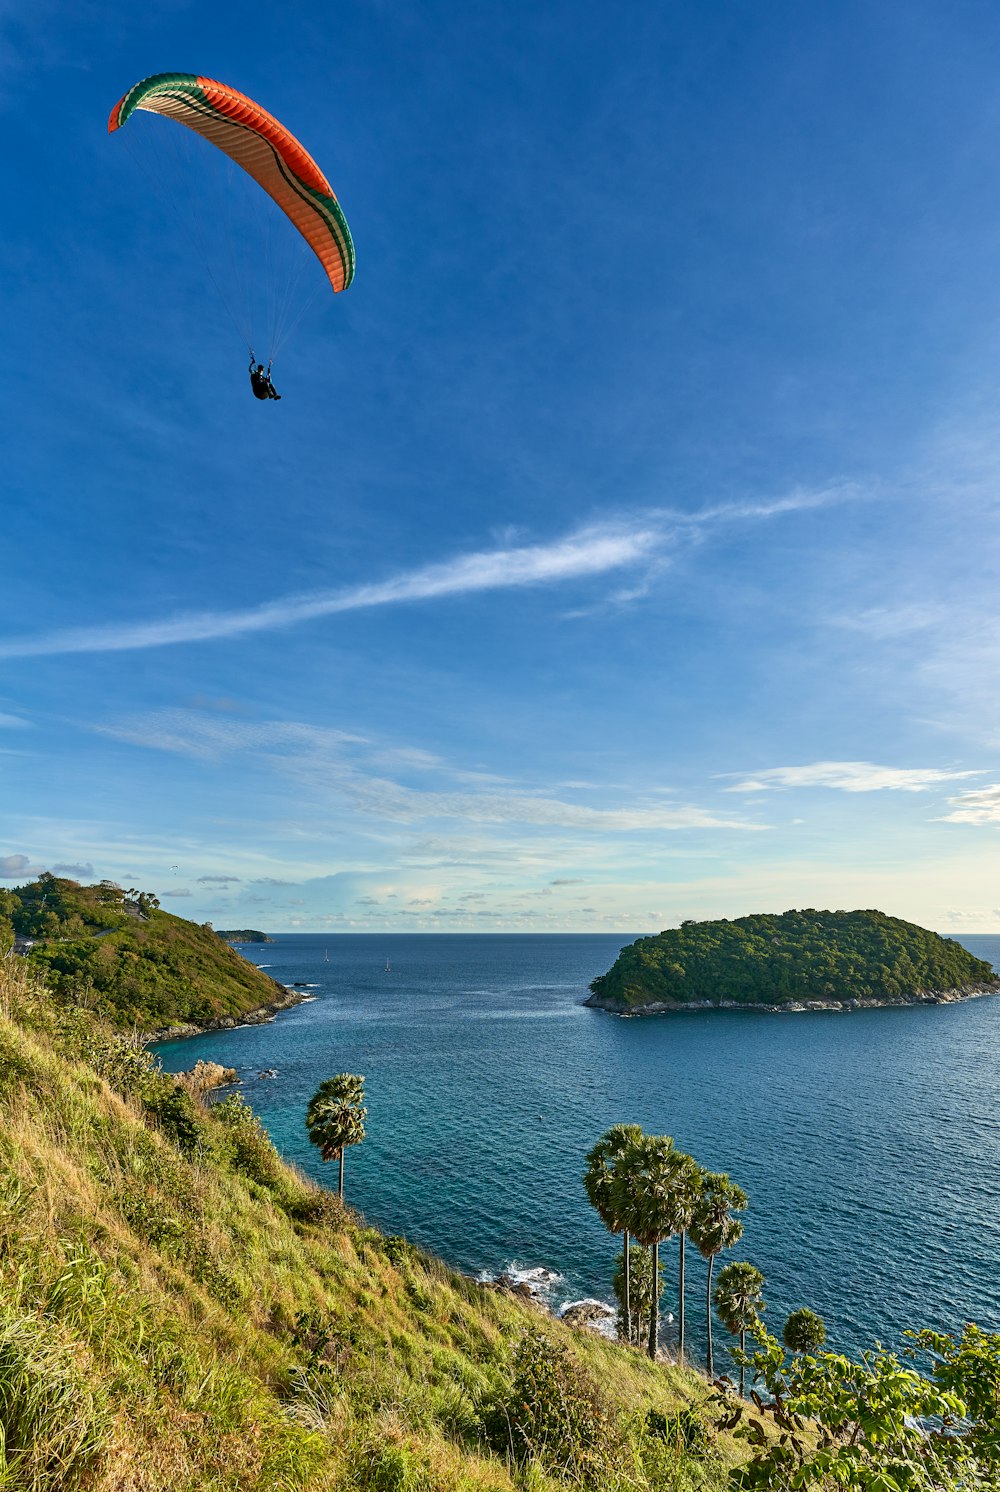 a person paragliding over a lush green hillside next to a body of water